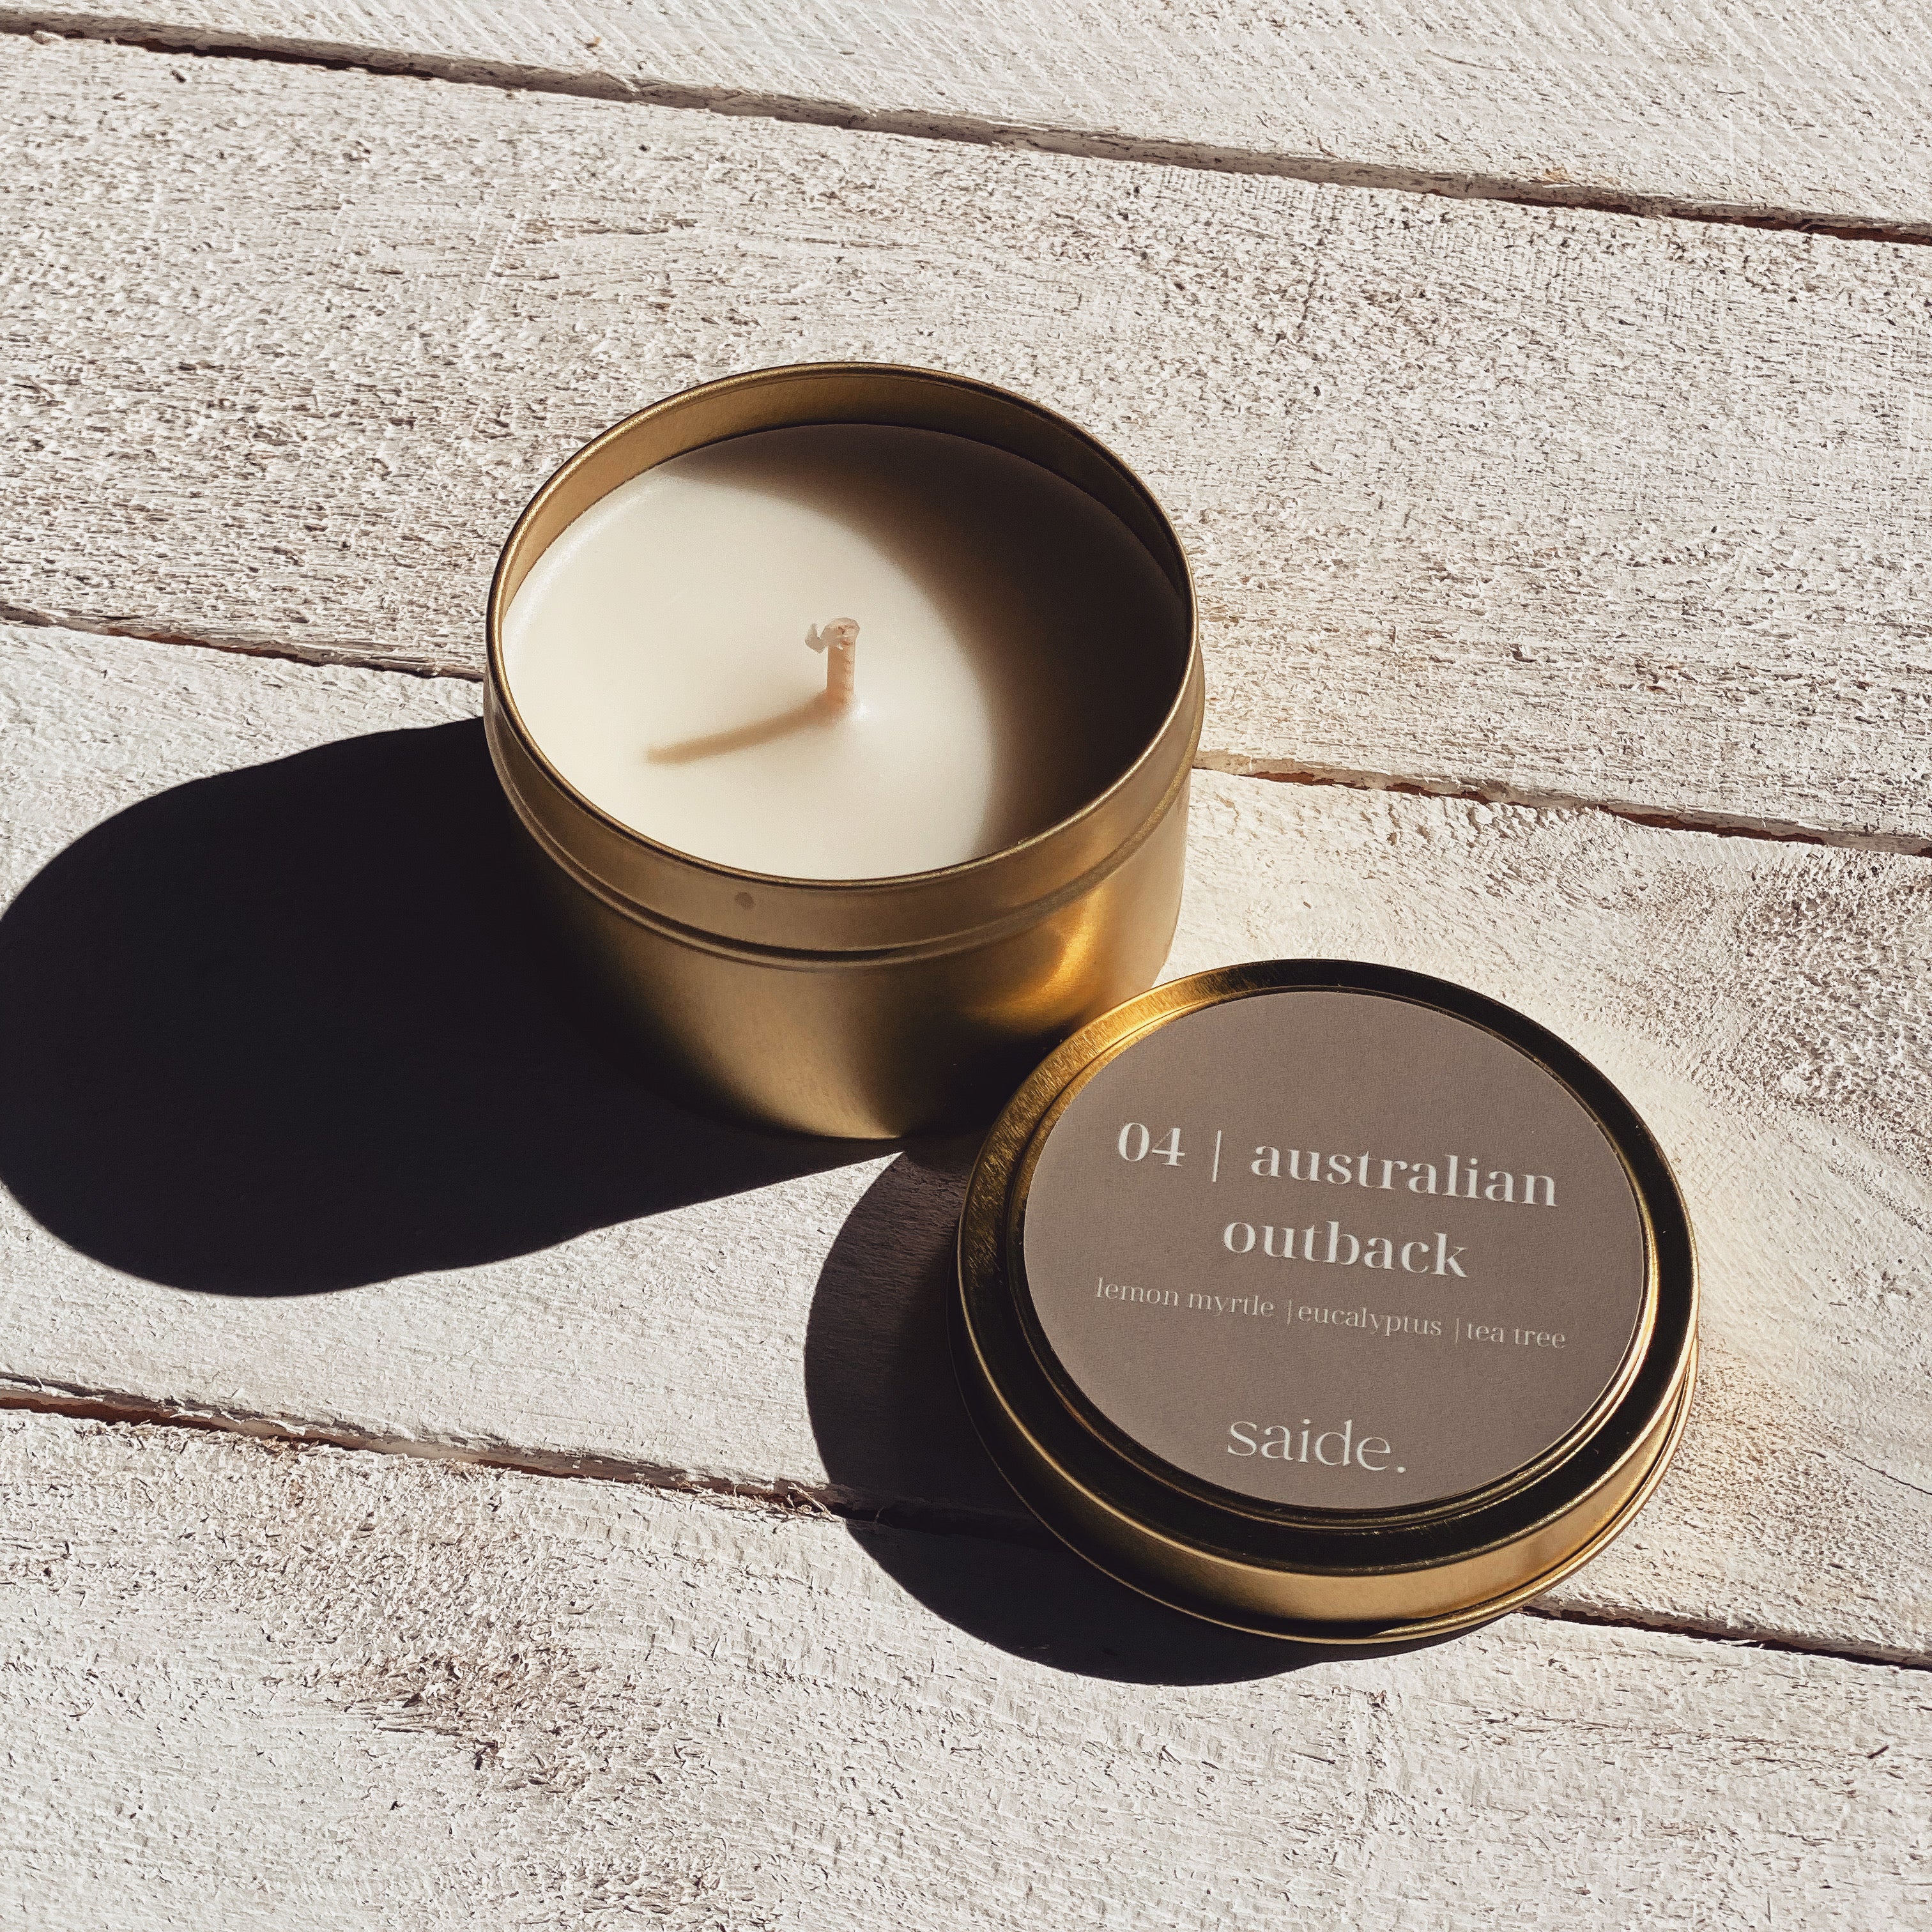 #4 australian outback soy candle